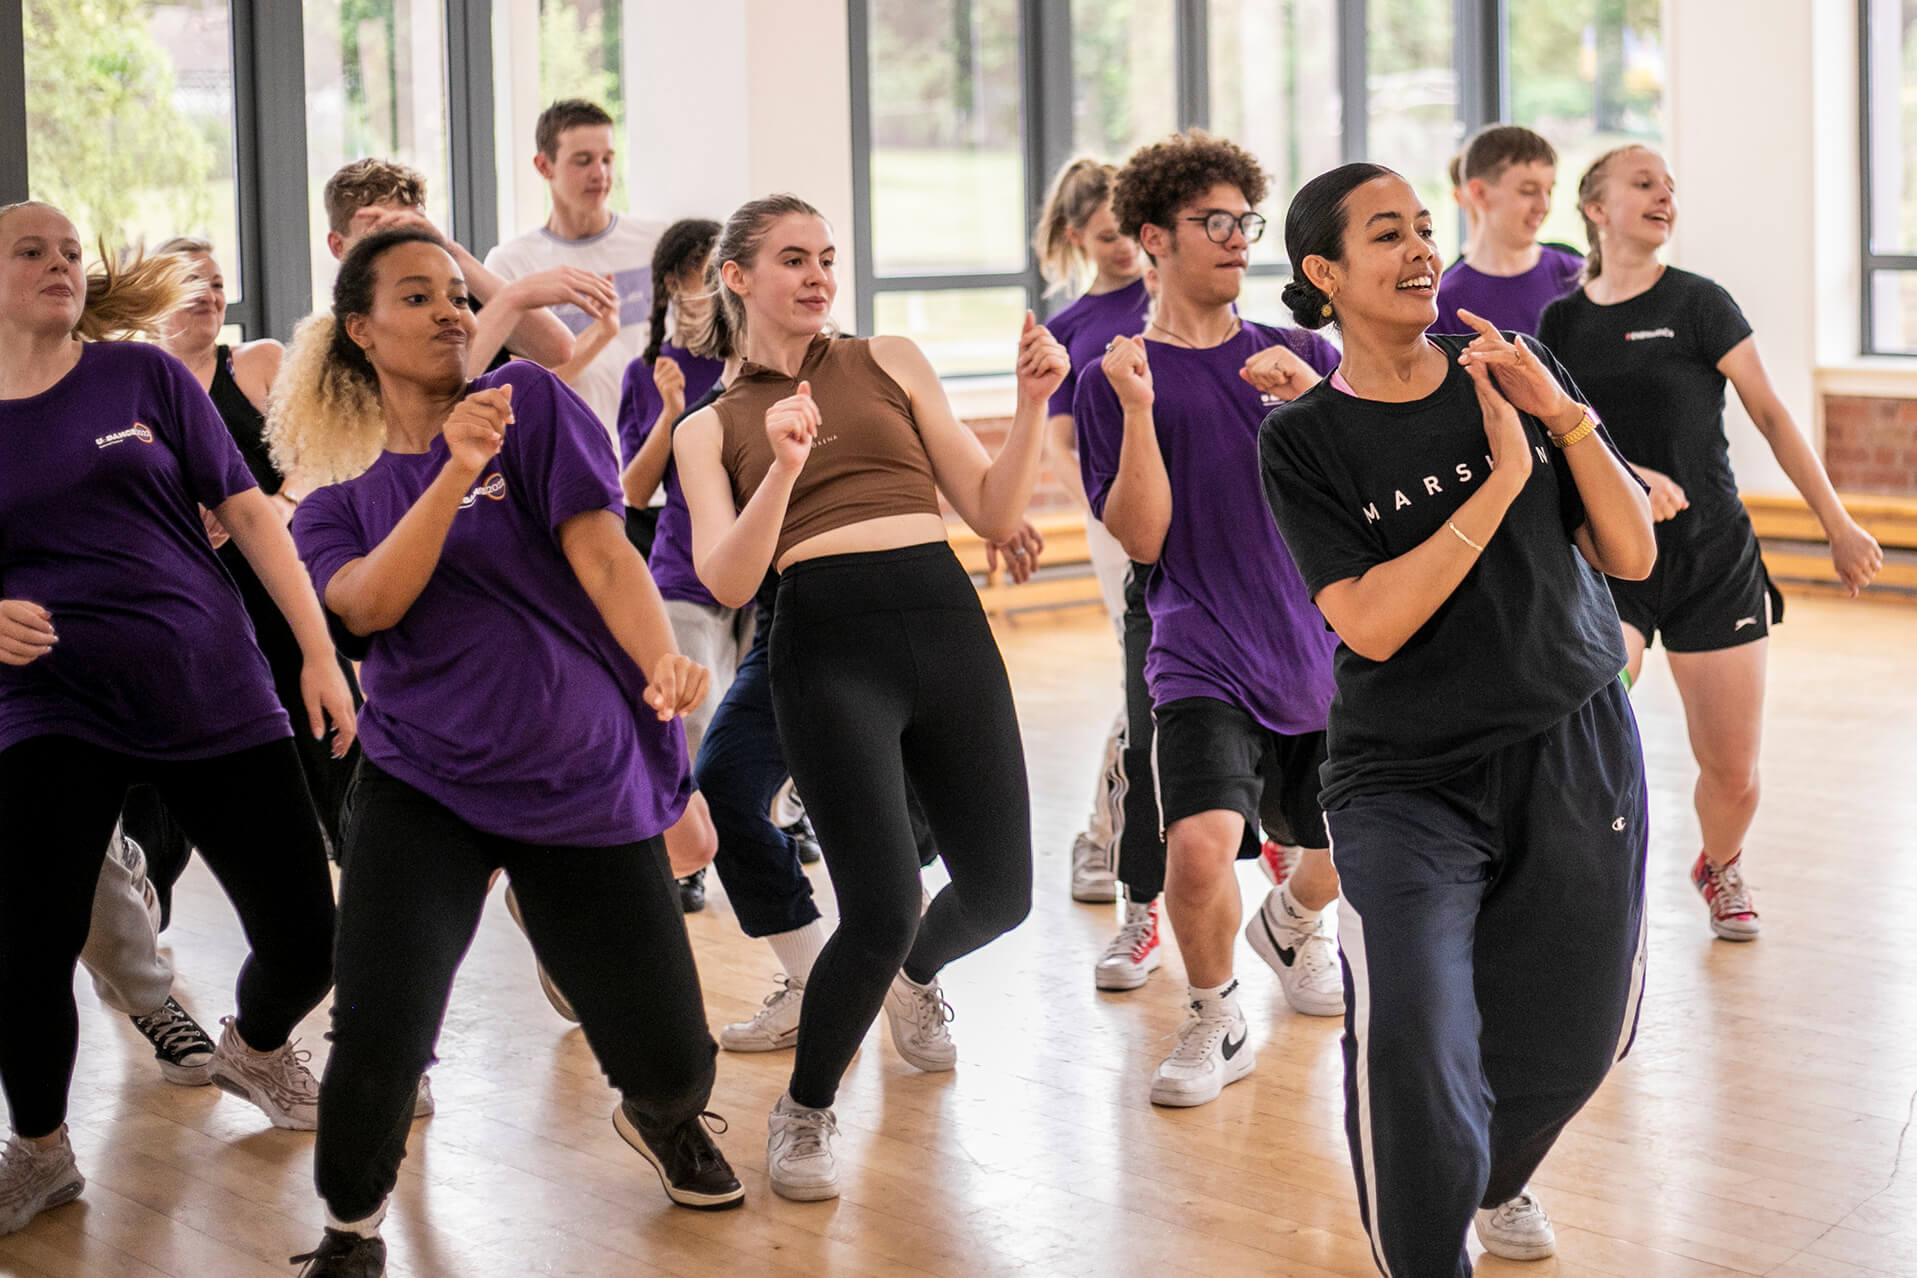 Female global majority dancer with curly hair tied back teaching a hip hop class. Students copying the lean back movement behind all wearing purple t-shirts in brightly lit dance studio